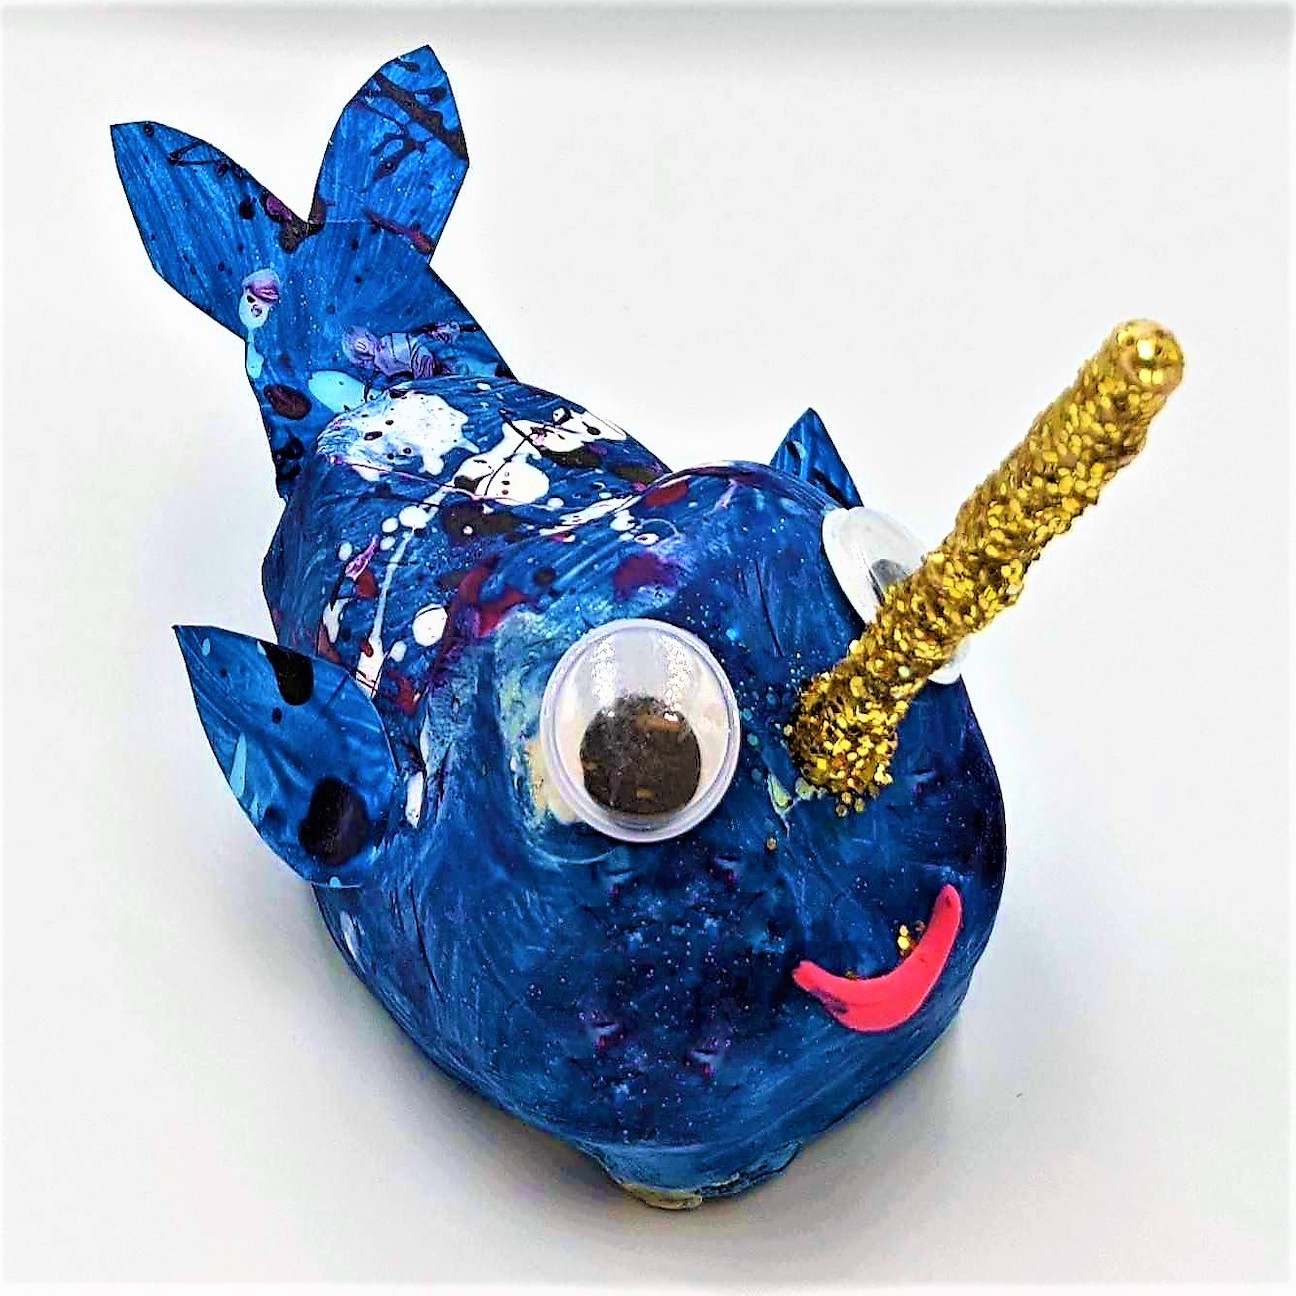 Kidcreate Studio - Fayetteville, Nifty Narwhal Art Project